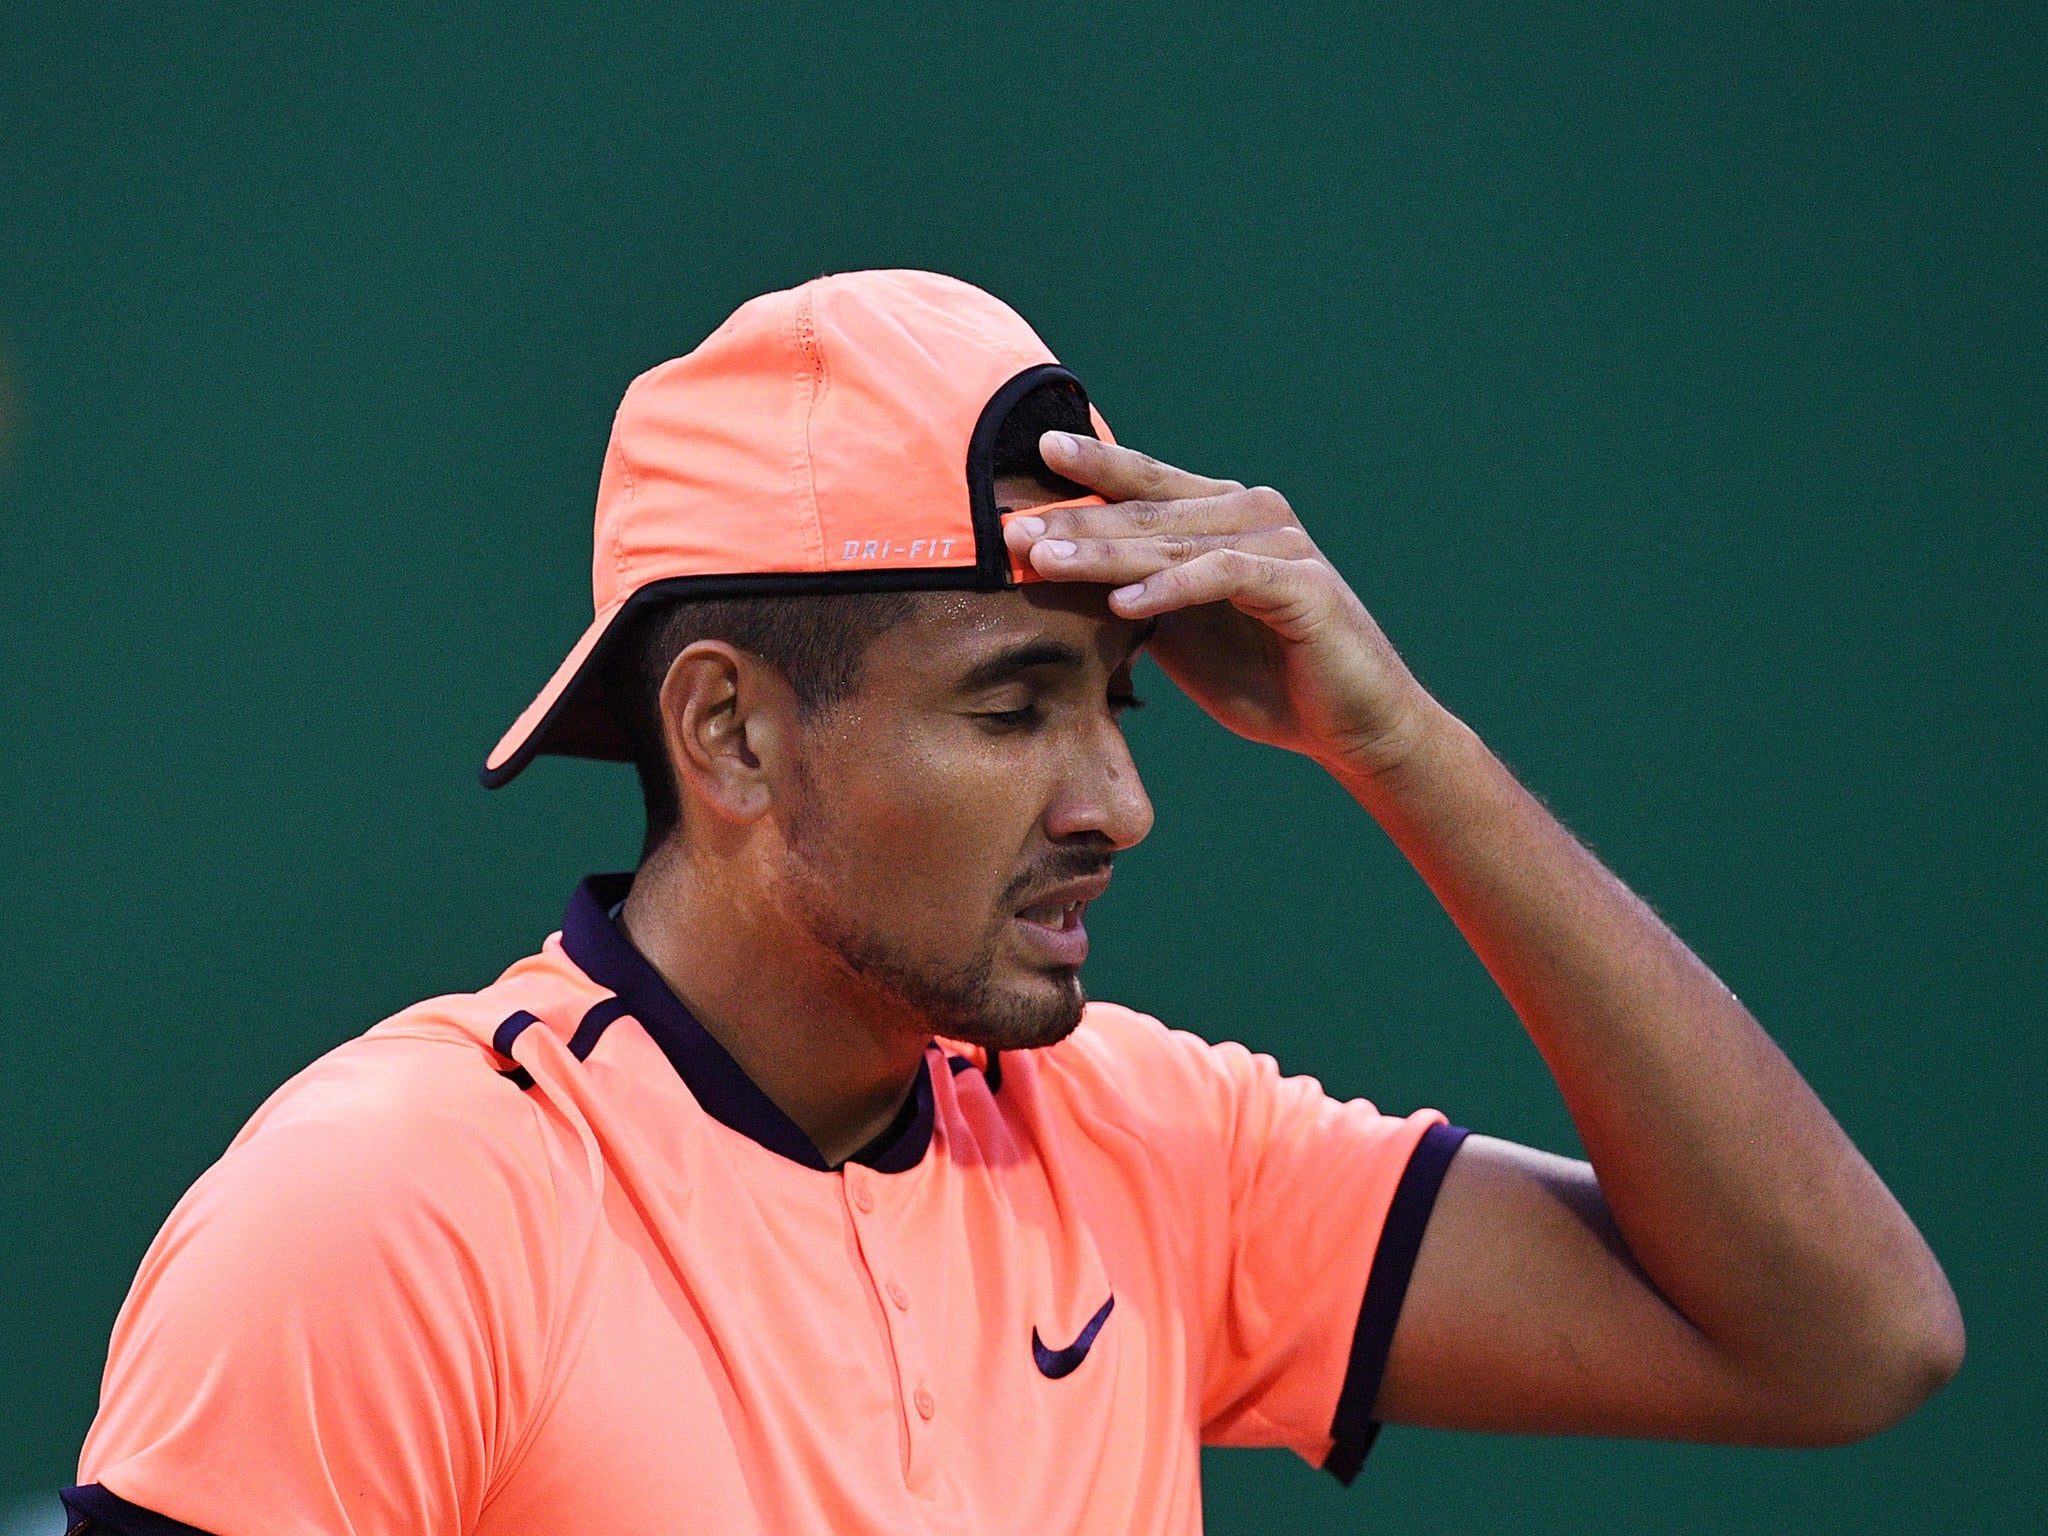 Nick Kyrgios gave up during his Shanghai Masters second round match against Mischa Zverev